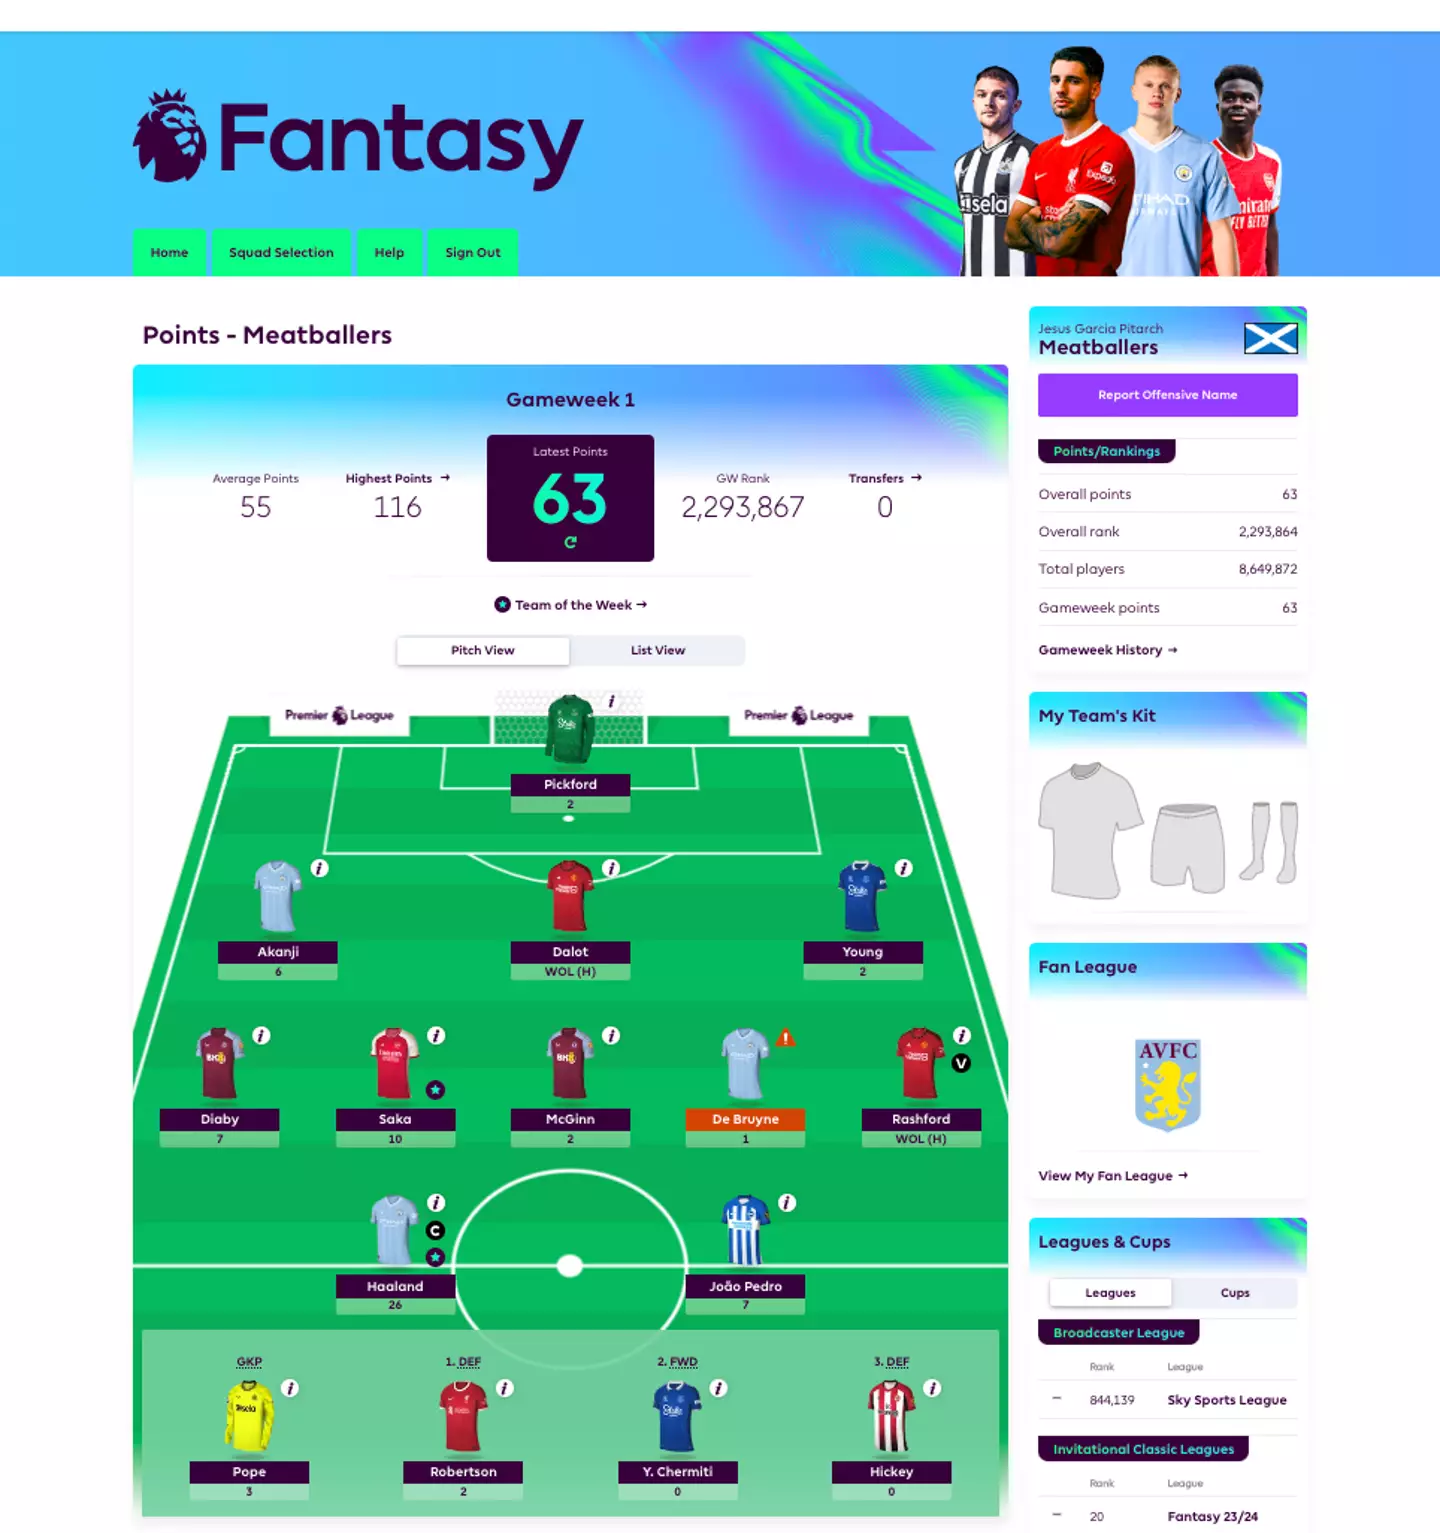 John McGinn is clearly a fan of new teammate Moussa Diaby. Image credit: Fantasy Premier League